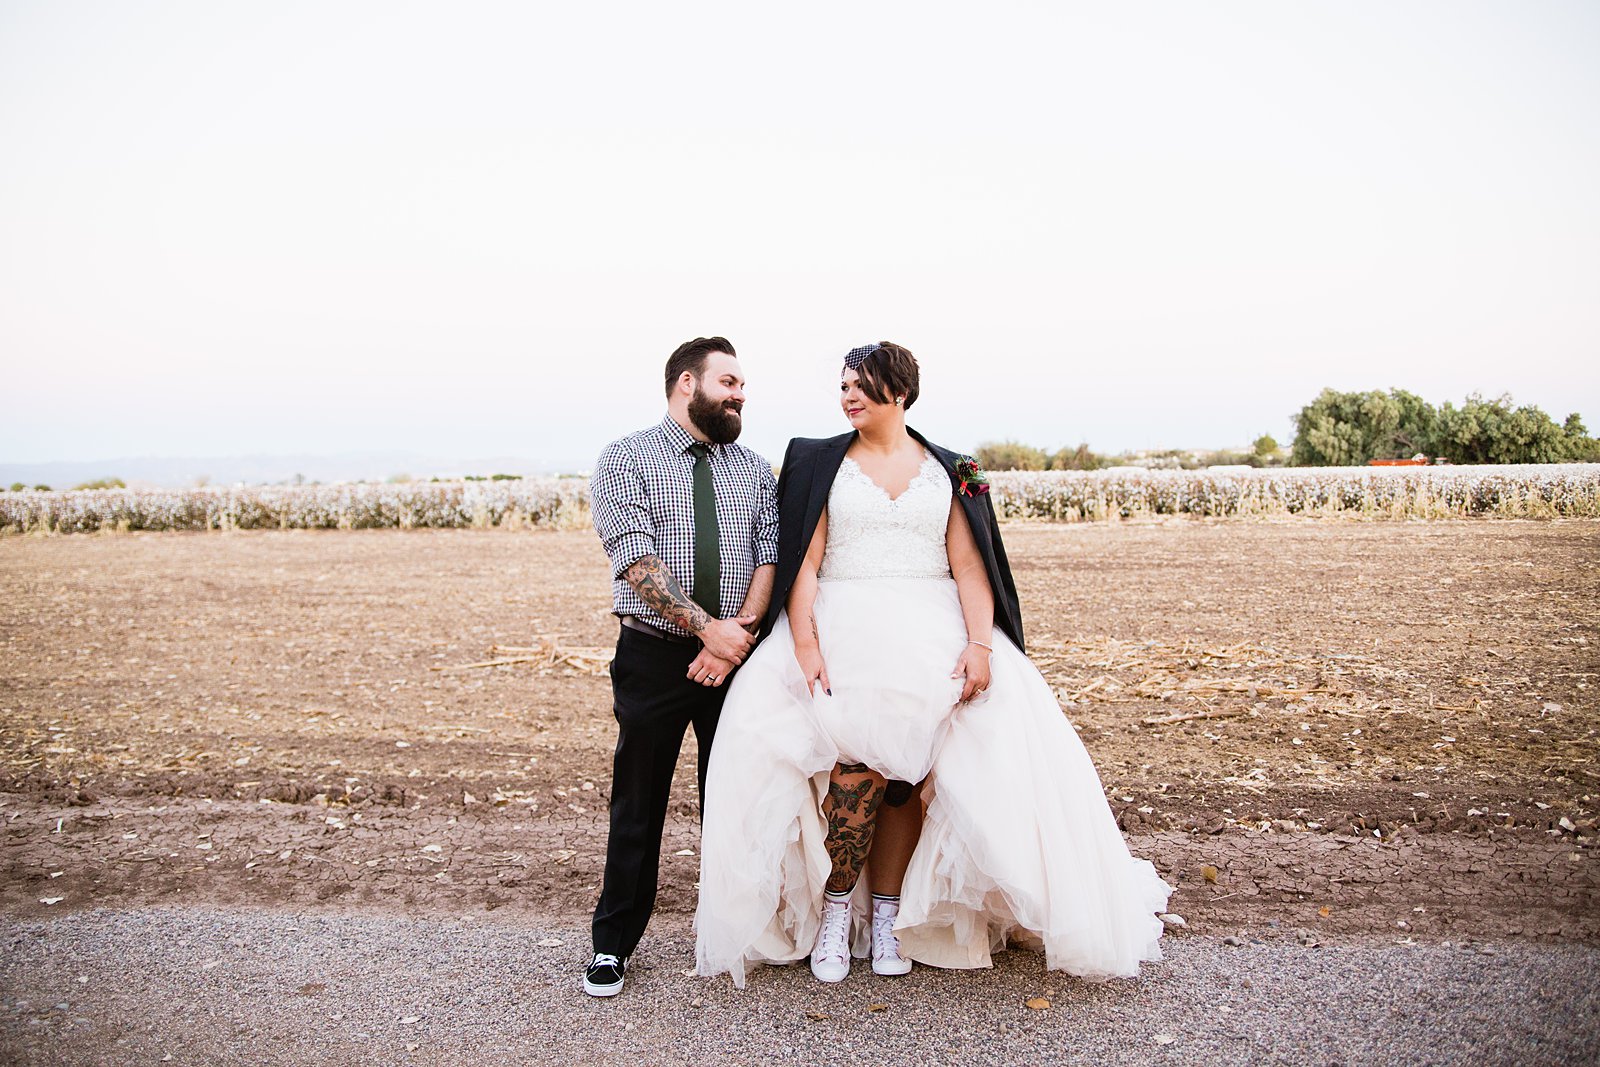 Tattooed bride and groom look at each other by Phoenix wedding photographer PMA Photography.